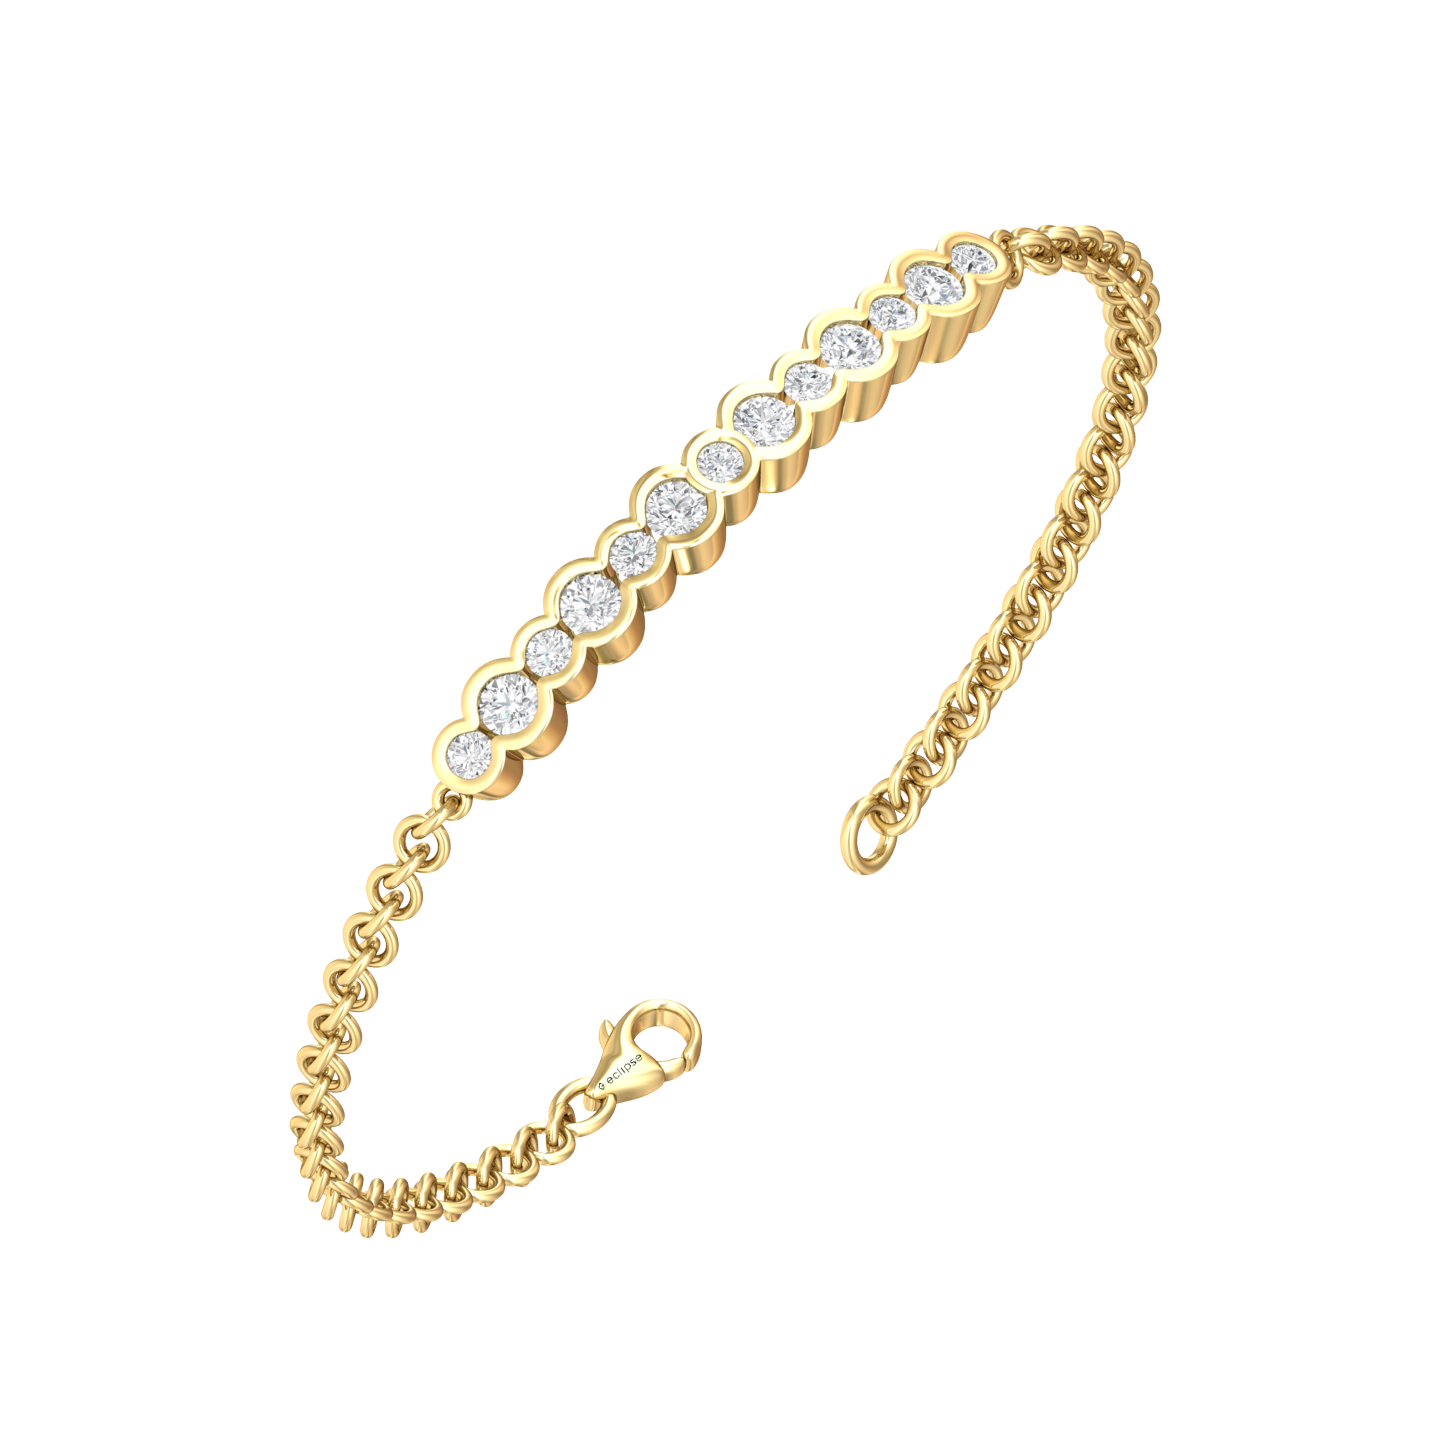 Eclipse Collection All Diamond Bracelet  Gardiner Brothers 18ct Yellow Gold  